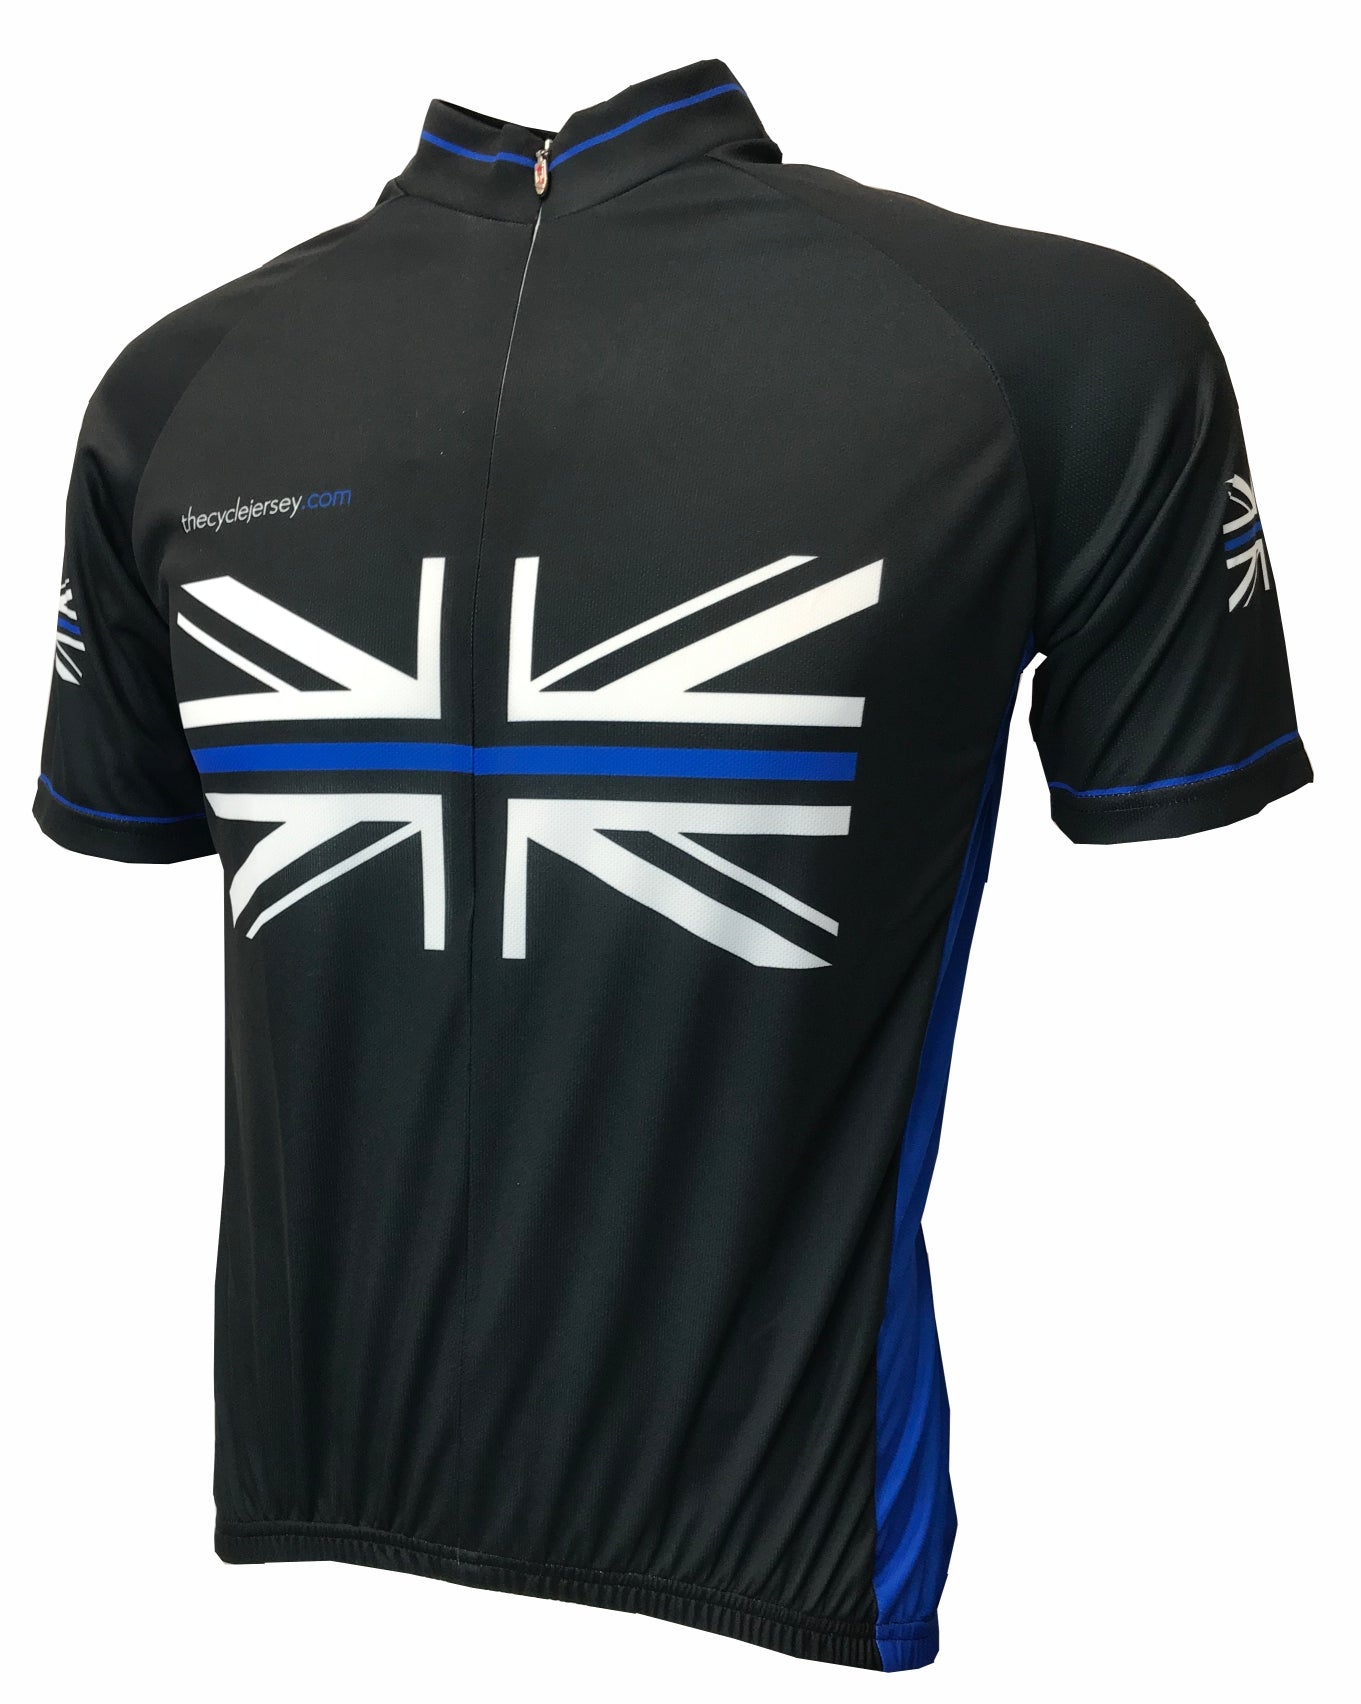 First Responder Thin Blue Line Road Jersey